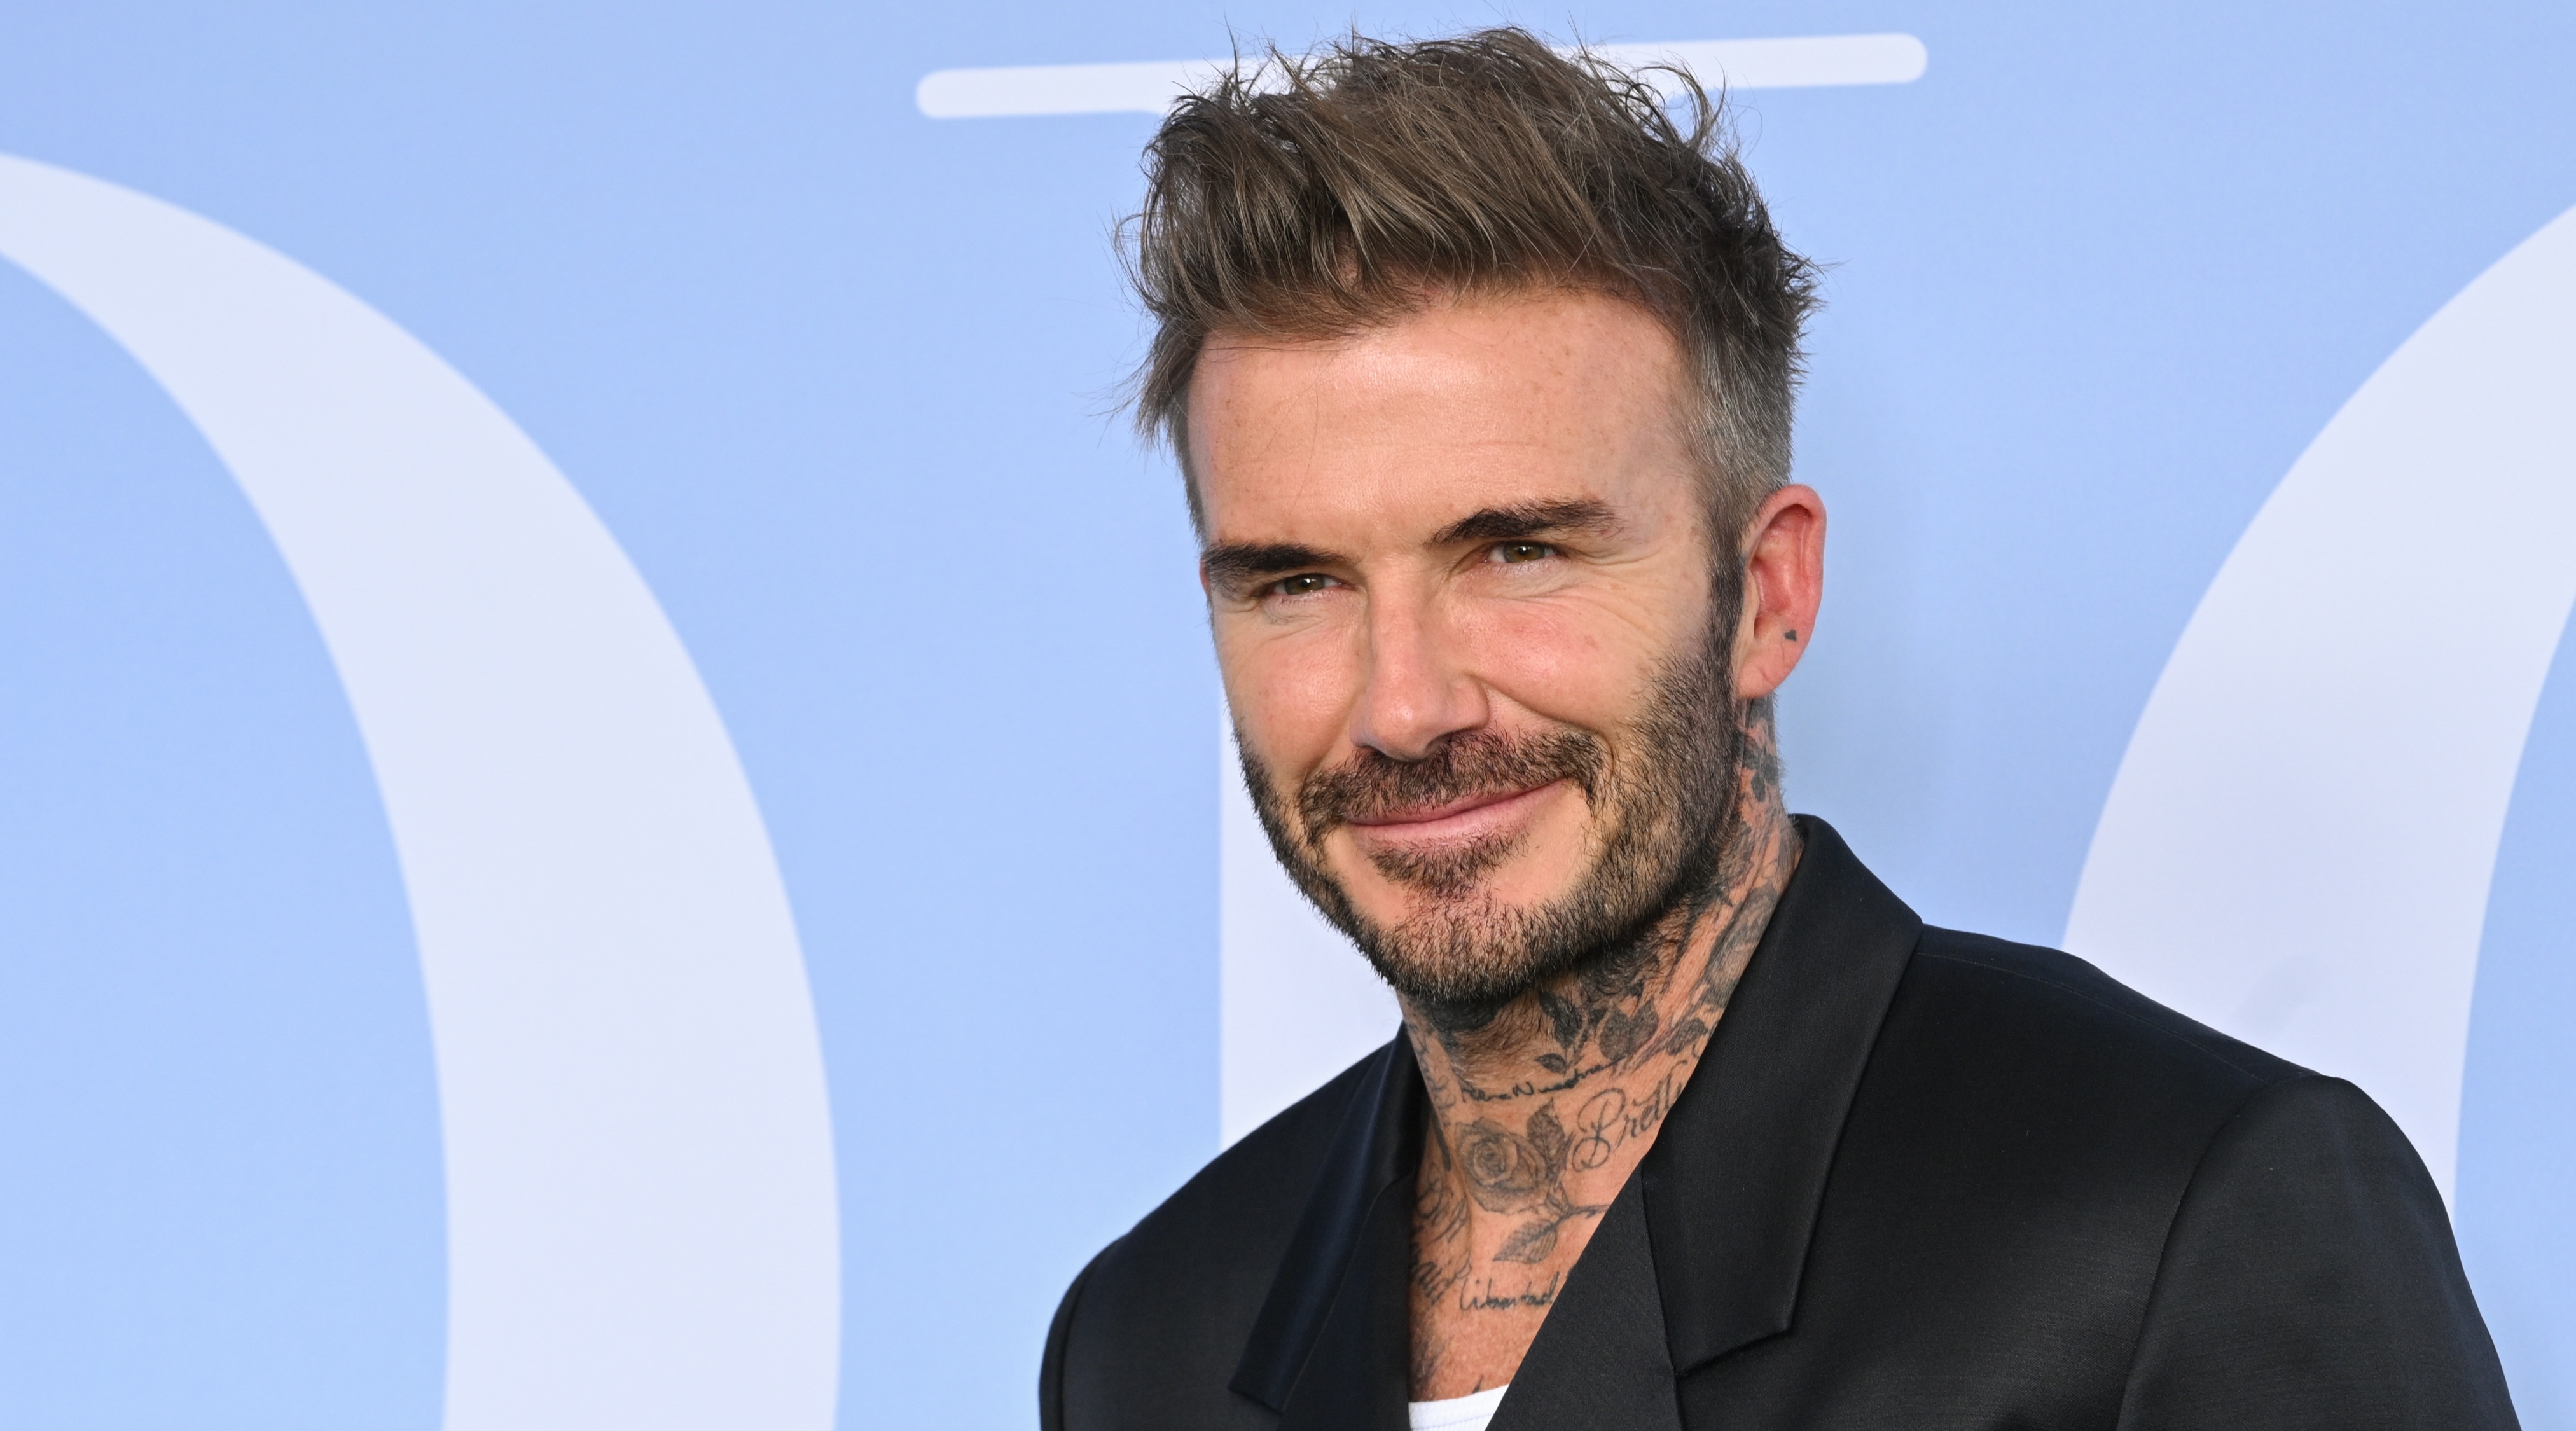 David Beckham attends the Dior Homme Menswear Spring Summer 2023 show as part of Paris Fashion Week on June 24, 2022 in Paris, France